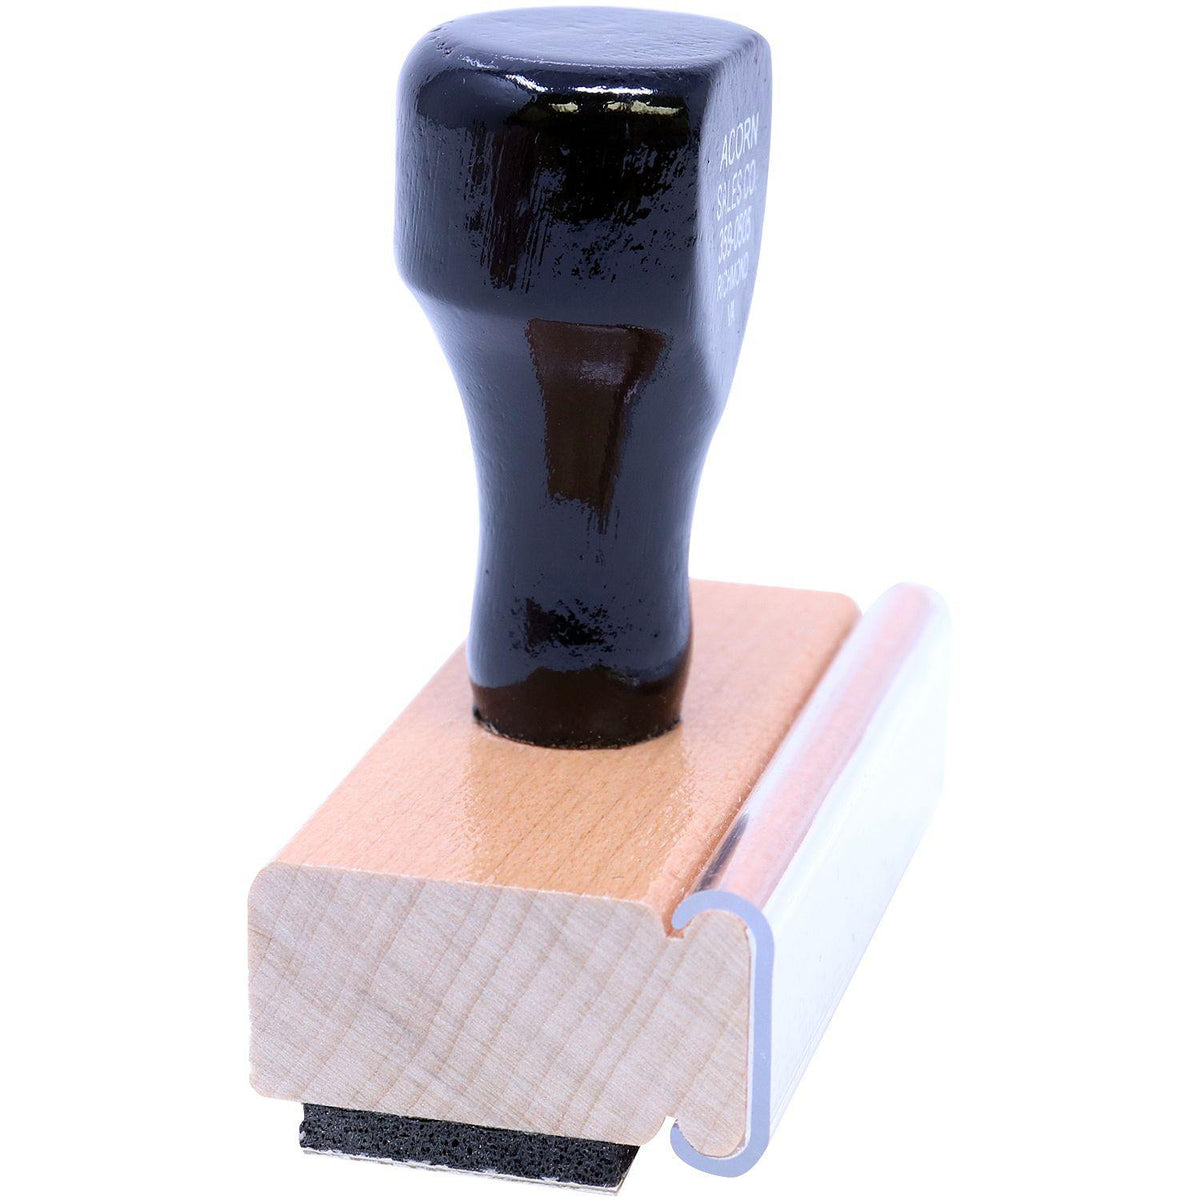 Magical Work Rubber Stamp - Engineer Seal Stamps - Brand_Acorn, Impression Size_Small, Stamp Type_Regular Stamp, Type of Use_Teacher